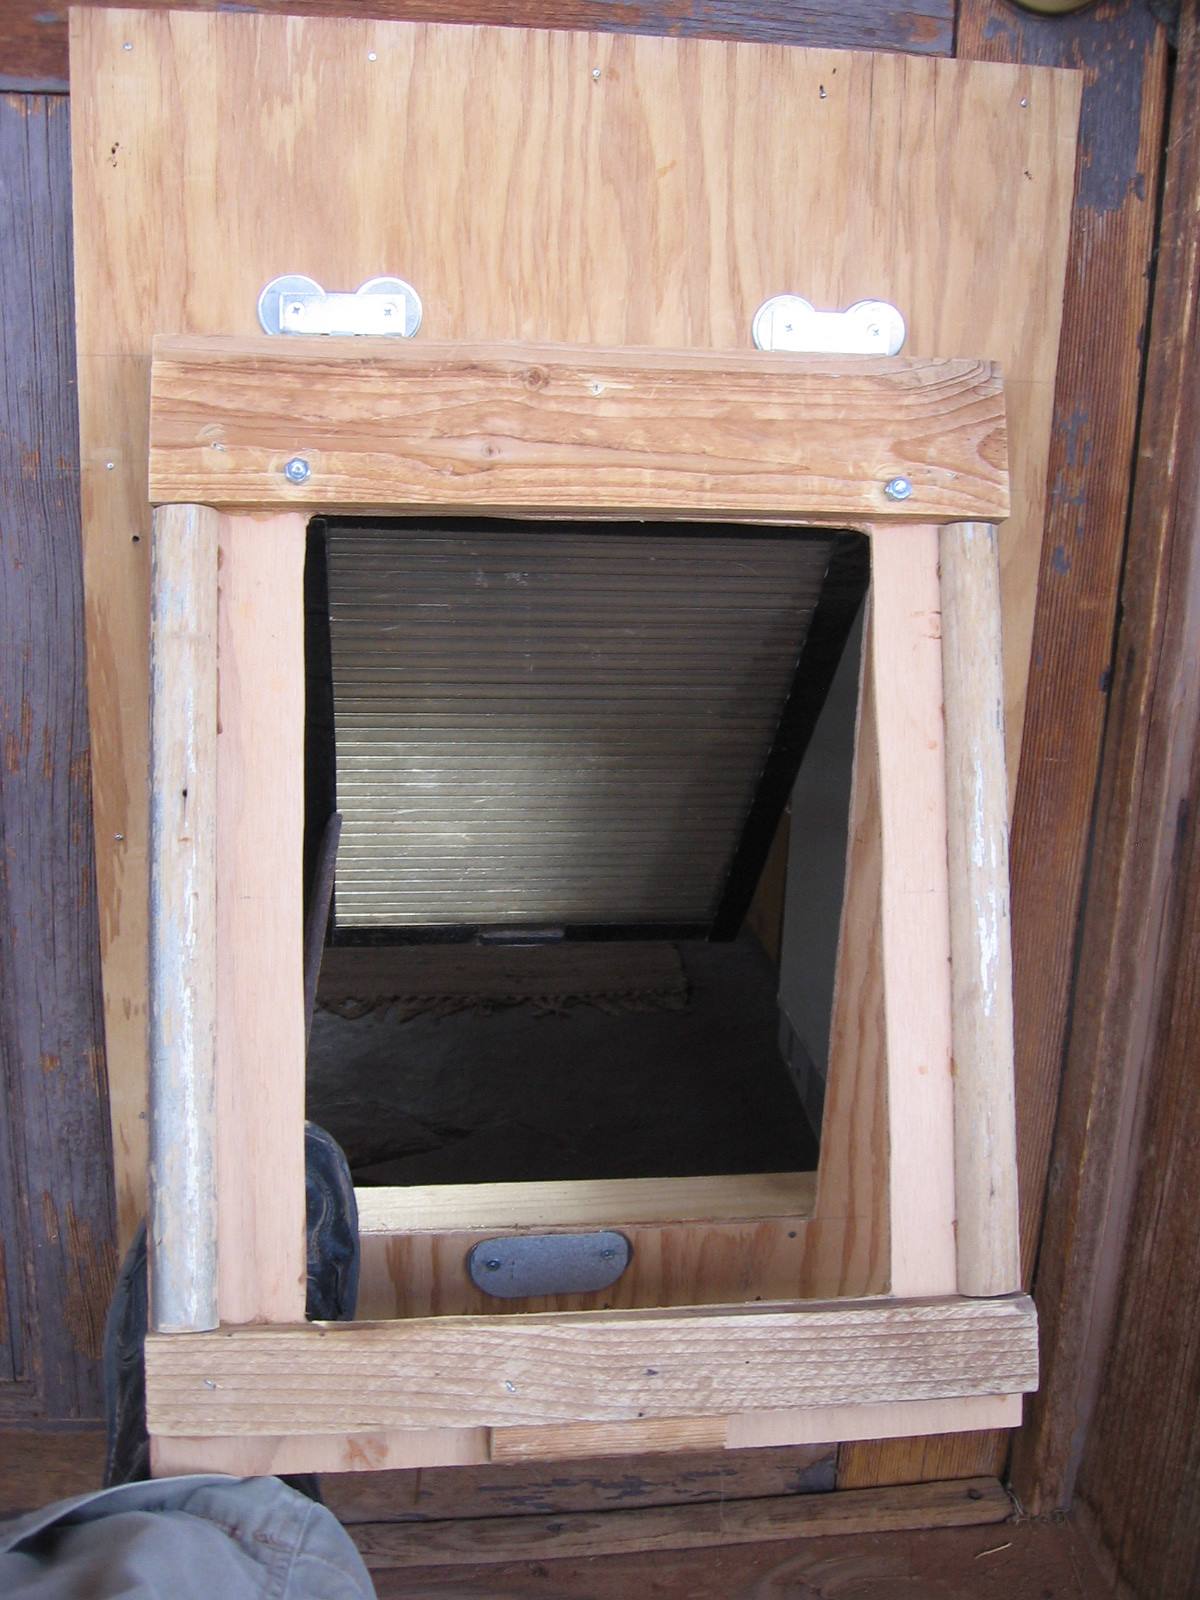 A Dog Door: The Two-Flap Solution